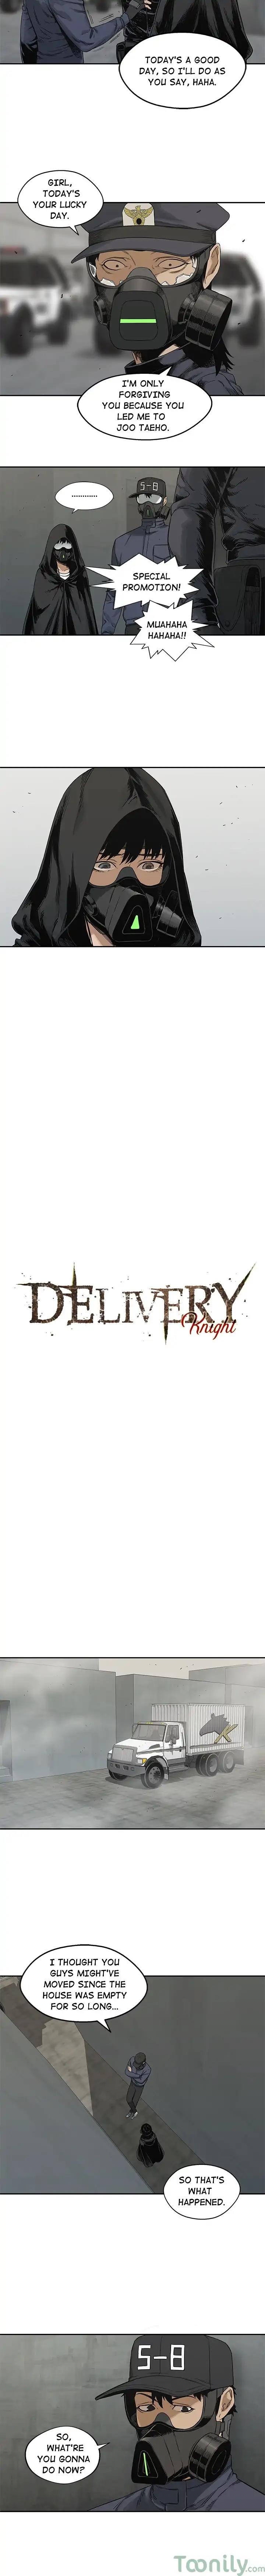 Delivery Knight Episode 24